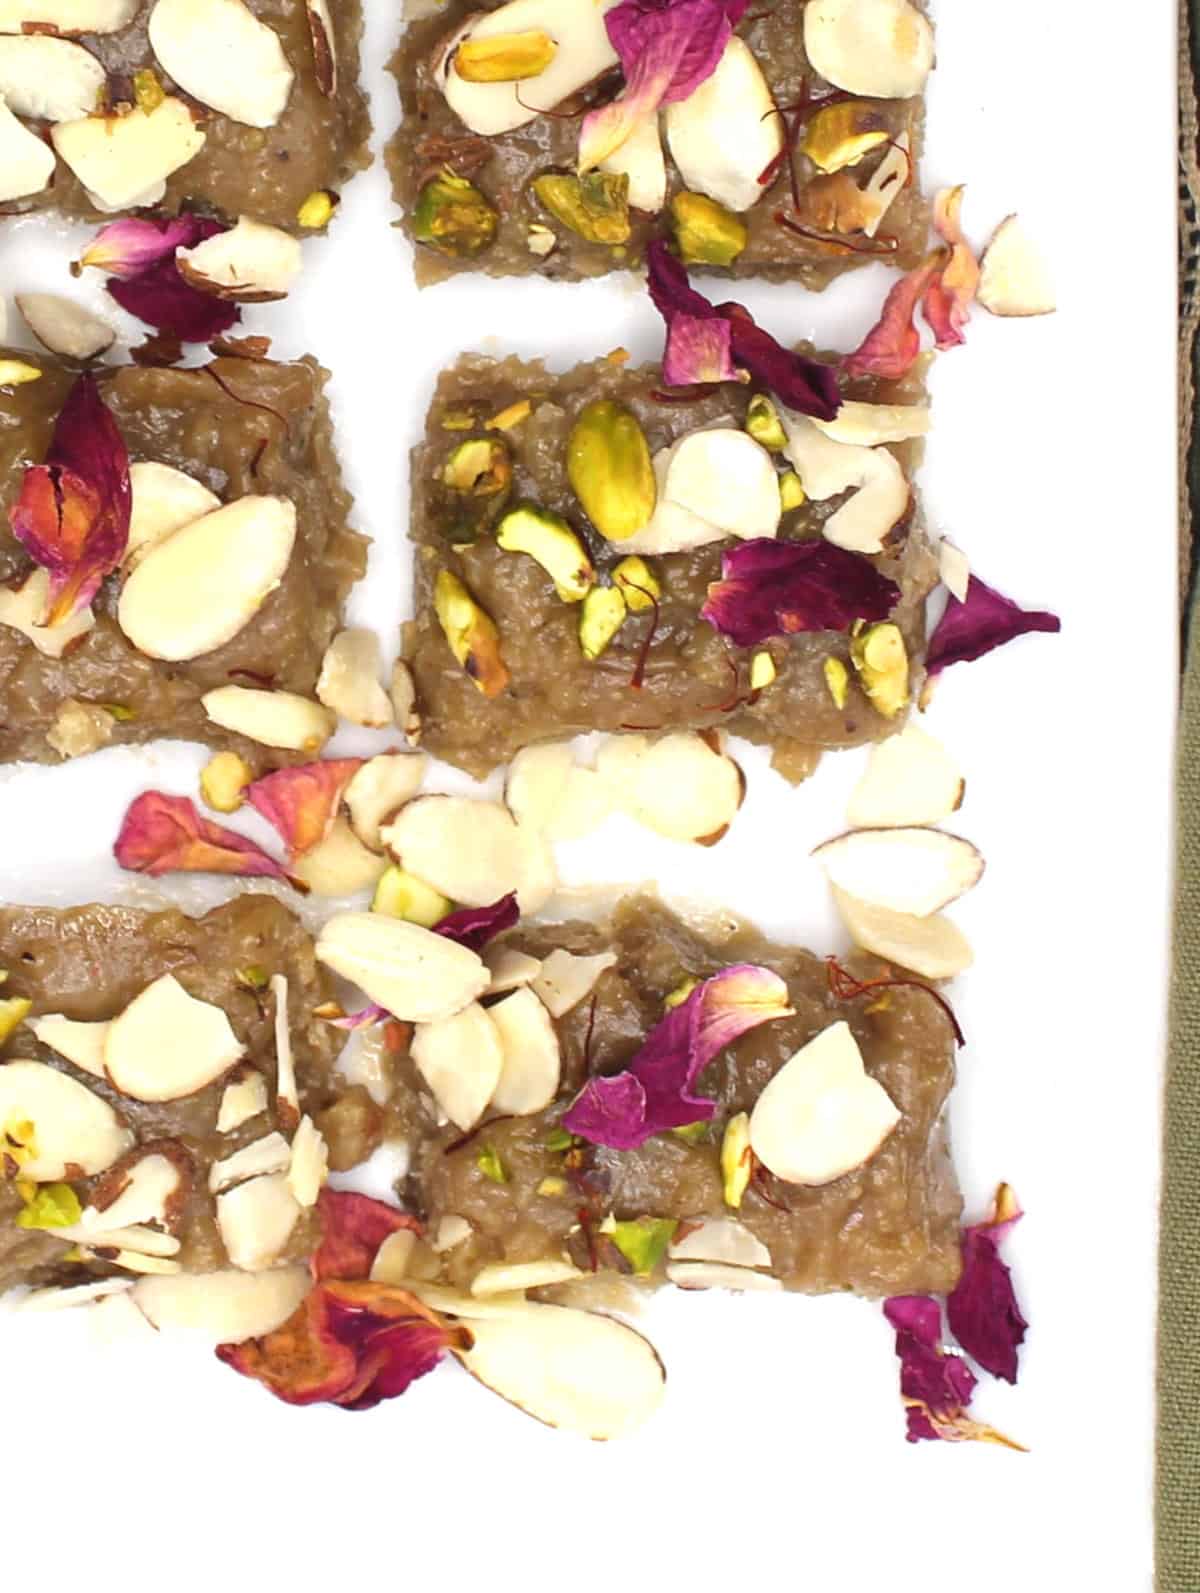 Rectangle vegan kalakand pieces on a plate with rose petals, nuts and saffron strands.